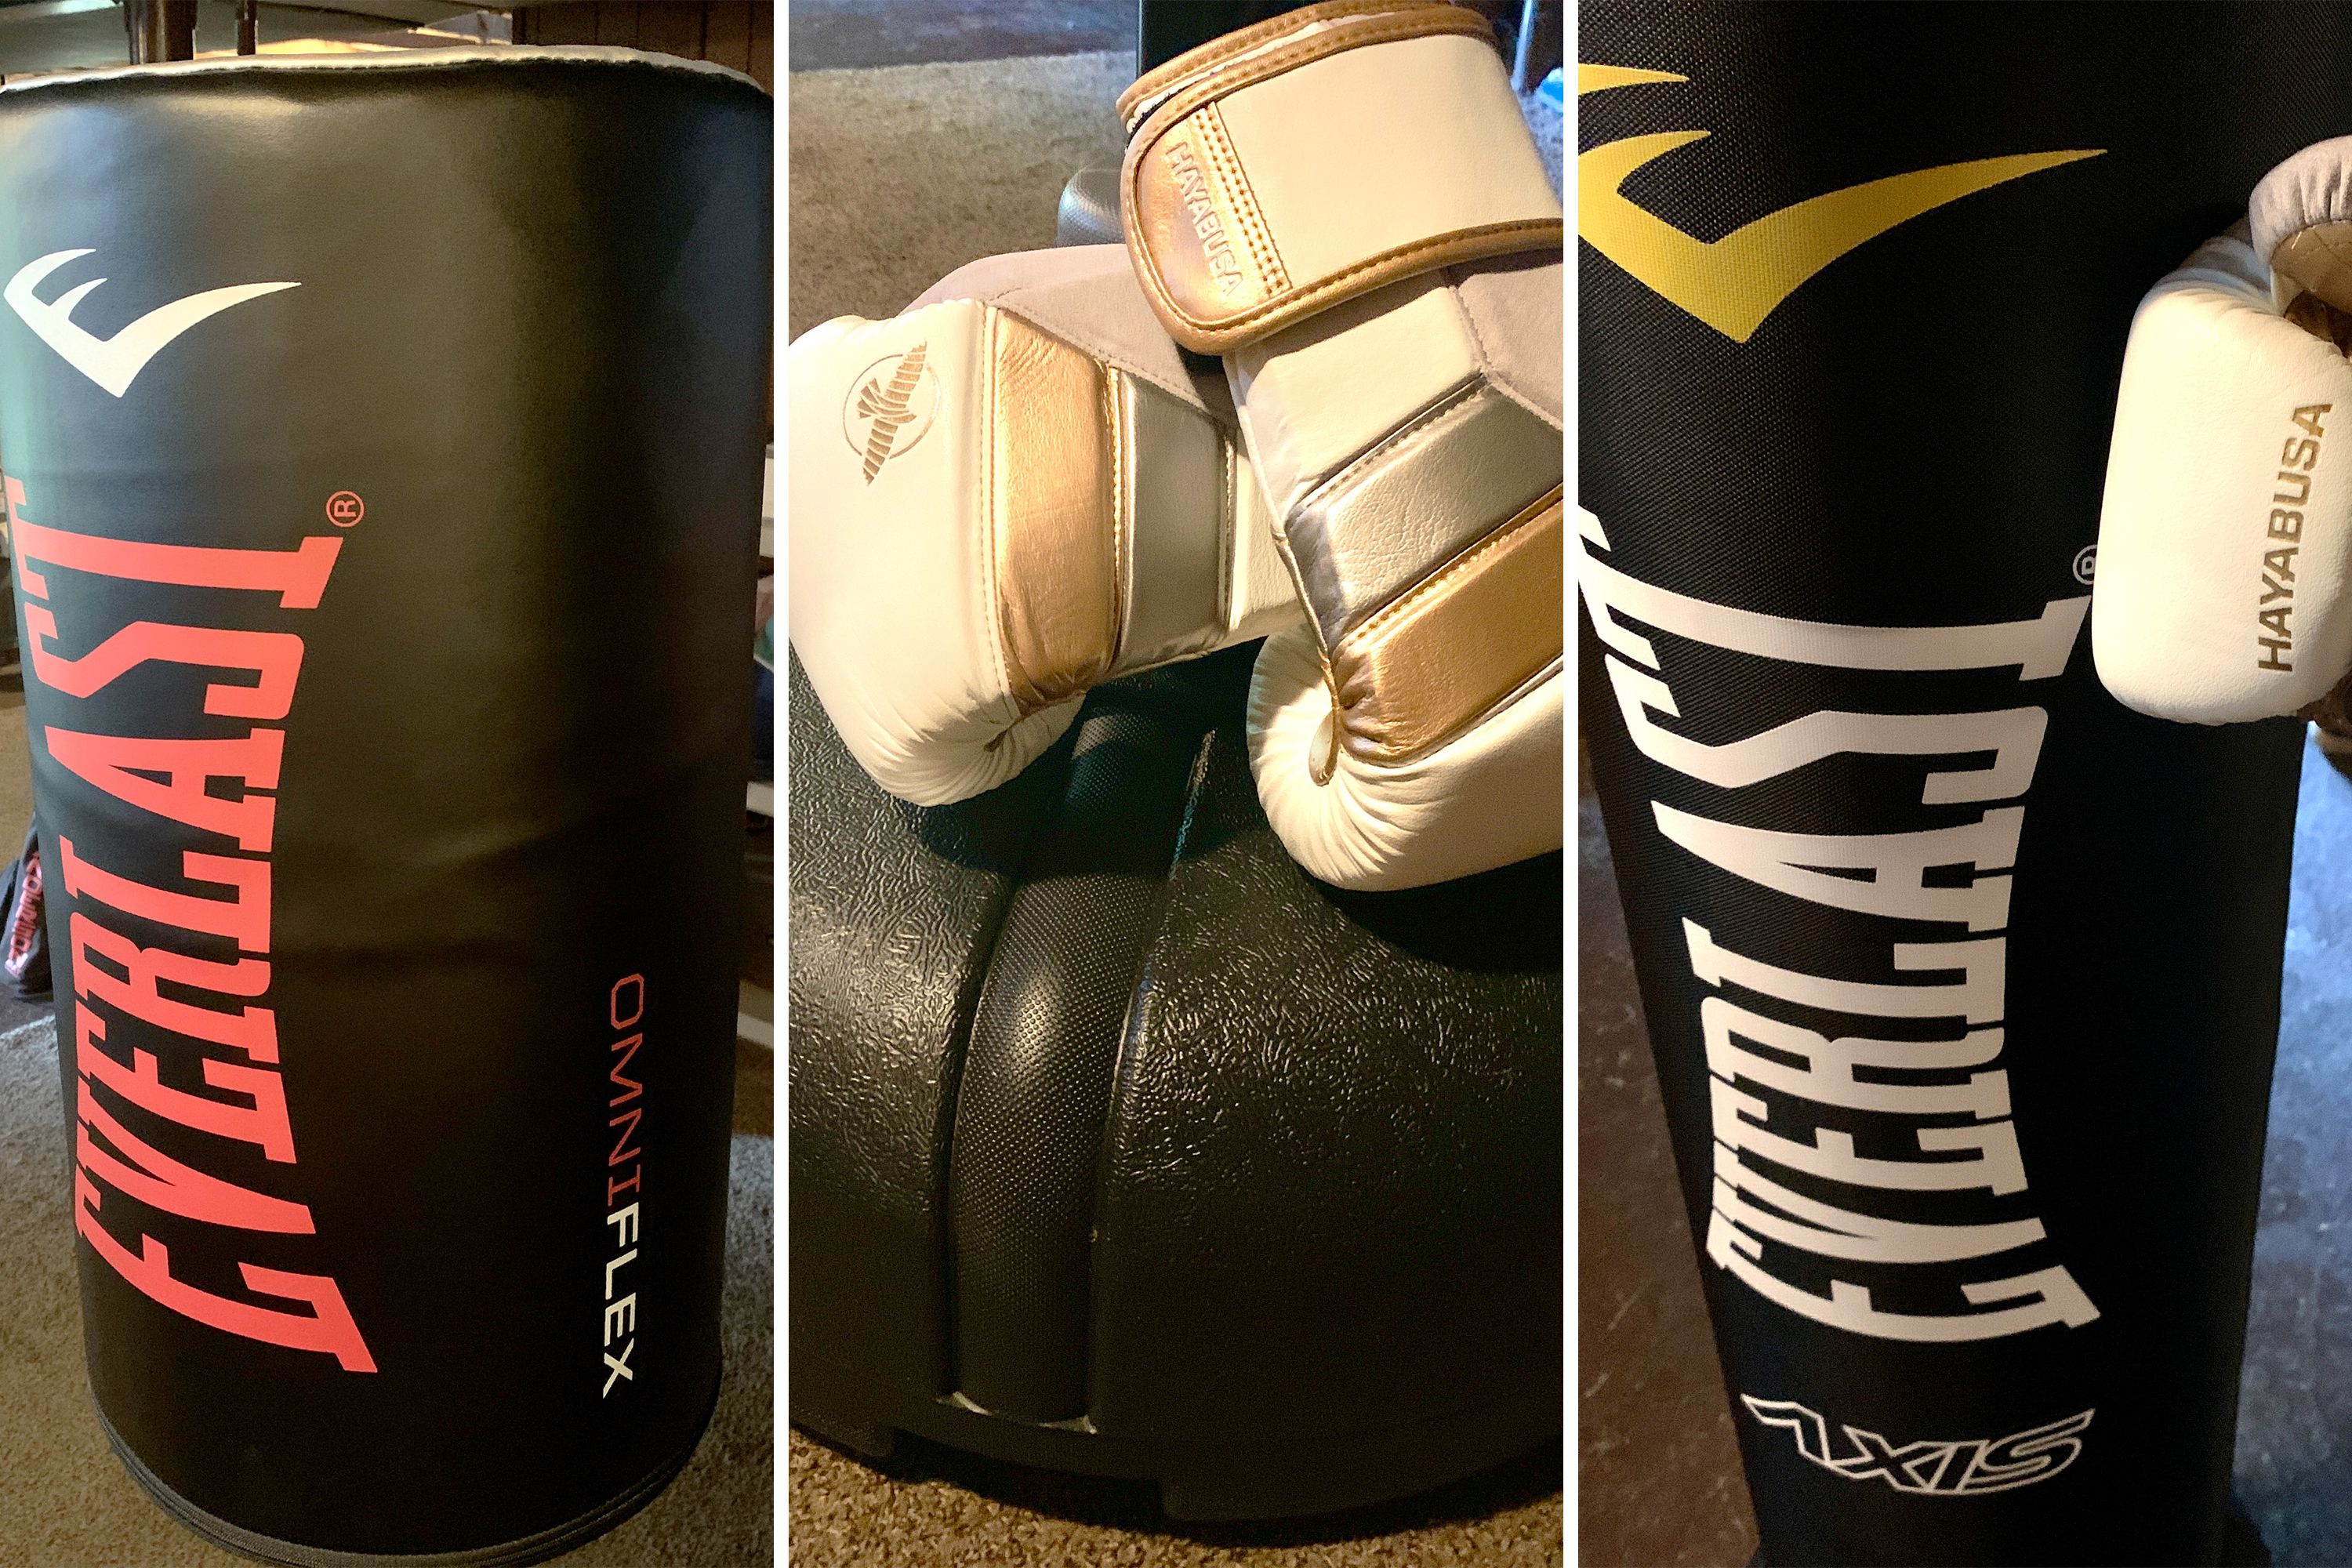 gijzelaar Afstoting Kritisch The Best Free Standing Punching Bags to Put Some Fight in Your Fitness